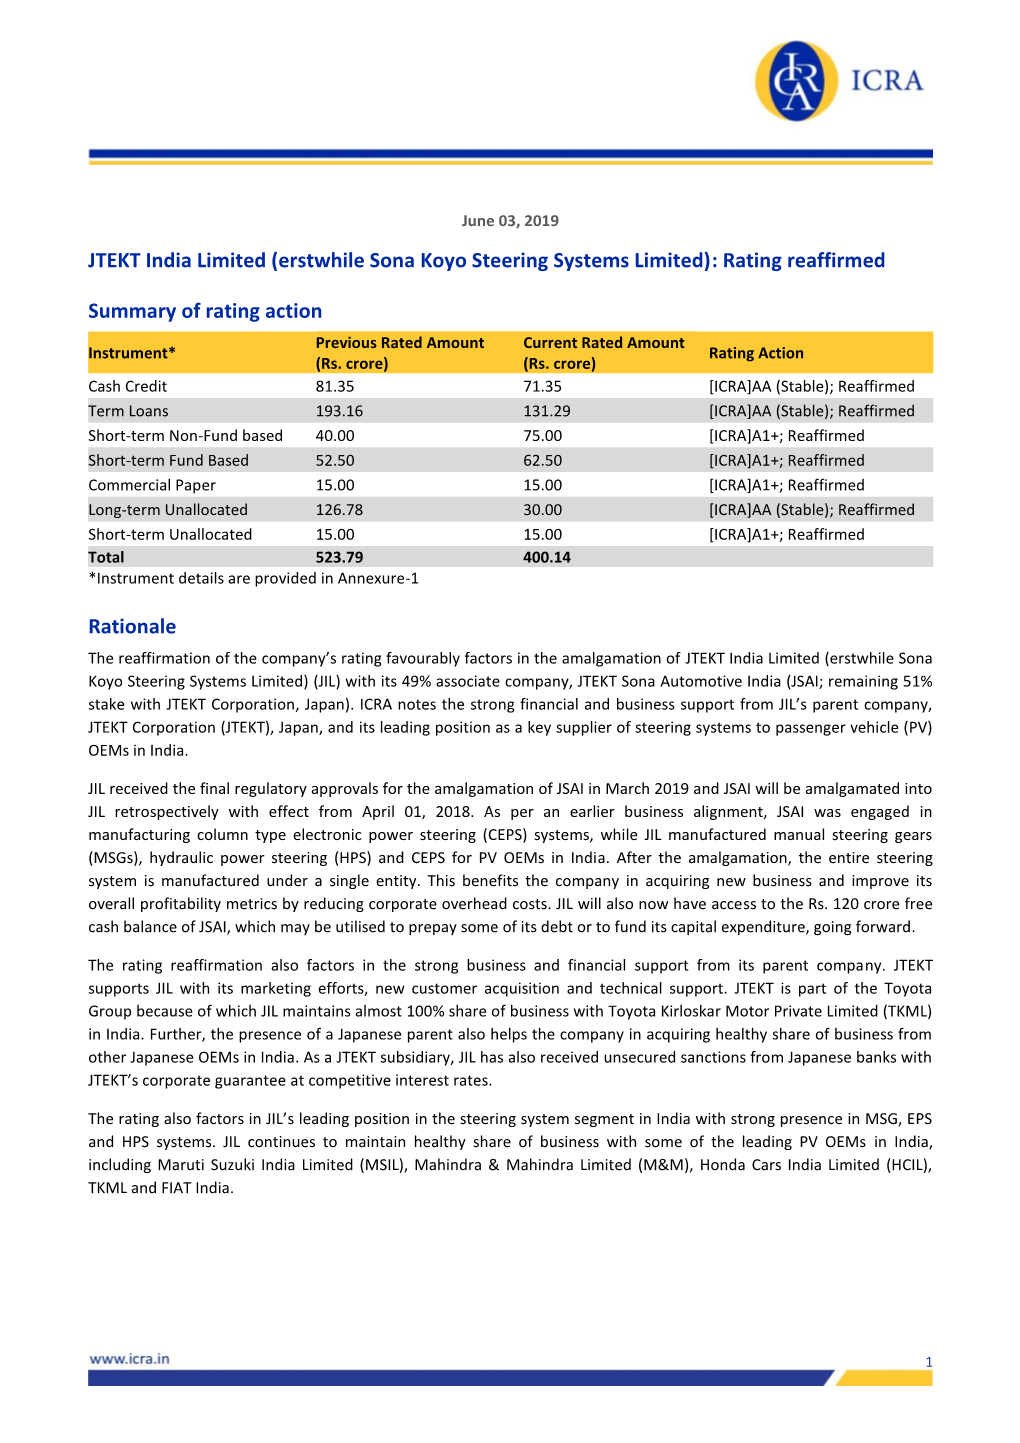 JTEKT India Limited (Erstwhile Sona Koyo Steering Systems Limited): Rating Reaffirmed